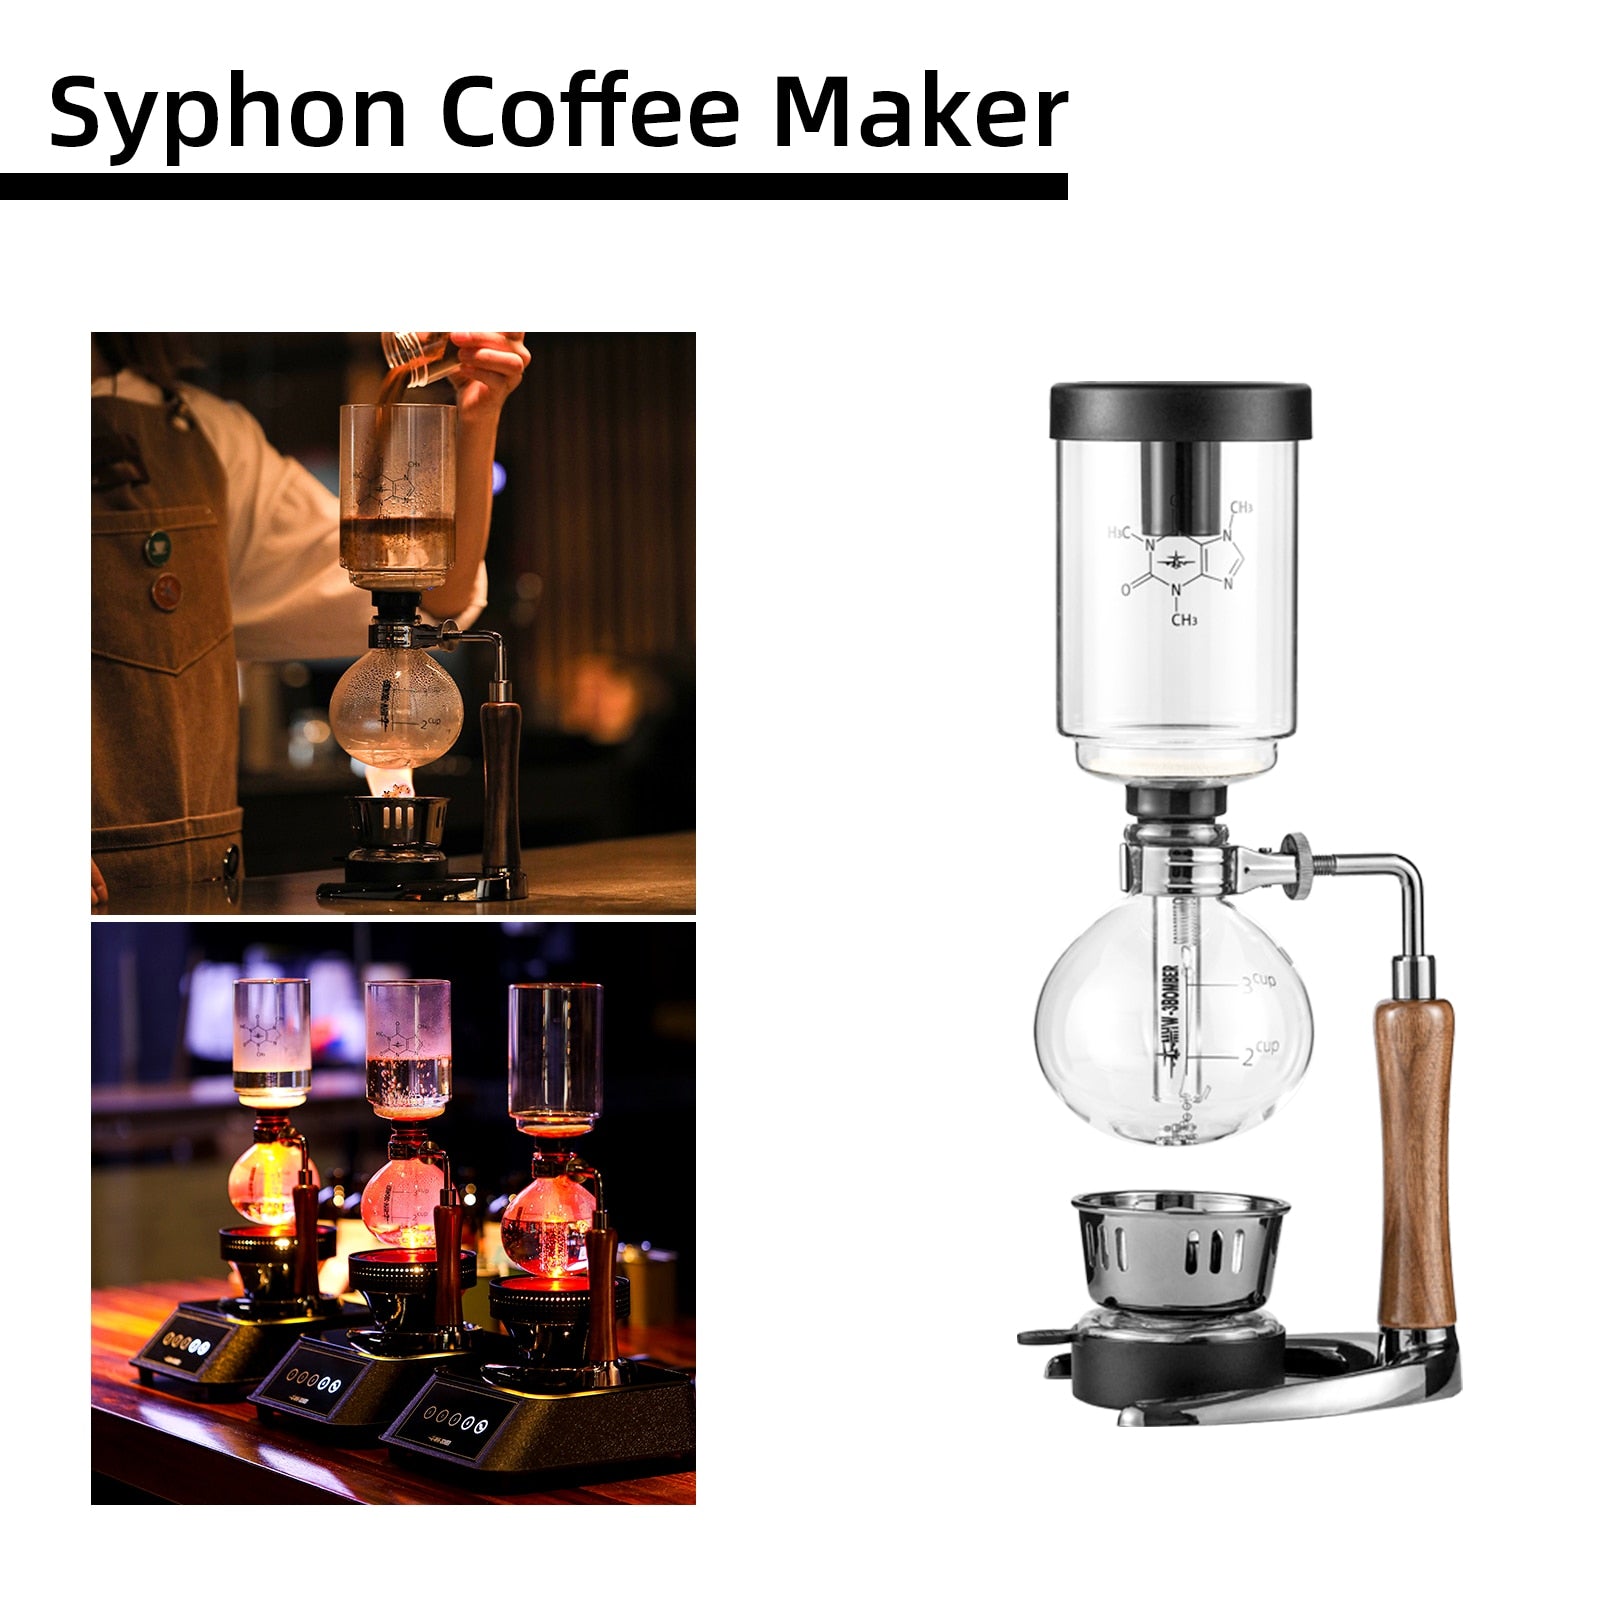 https://pocillo.co/cdn/shop/files/MHW-3BOMBER-Syphon-Coffee-Maker-Clear-Glass-Siphon-Coffee-Marchine-with-Vintage-Stirrer-Professional-Home-Barista_bbf67ea1-bfa6-4188-a5c1-5ce30381dc59.jpg?v=1699321436&width=1946